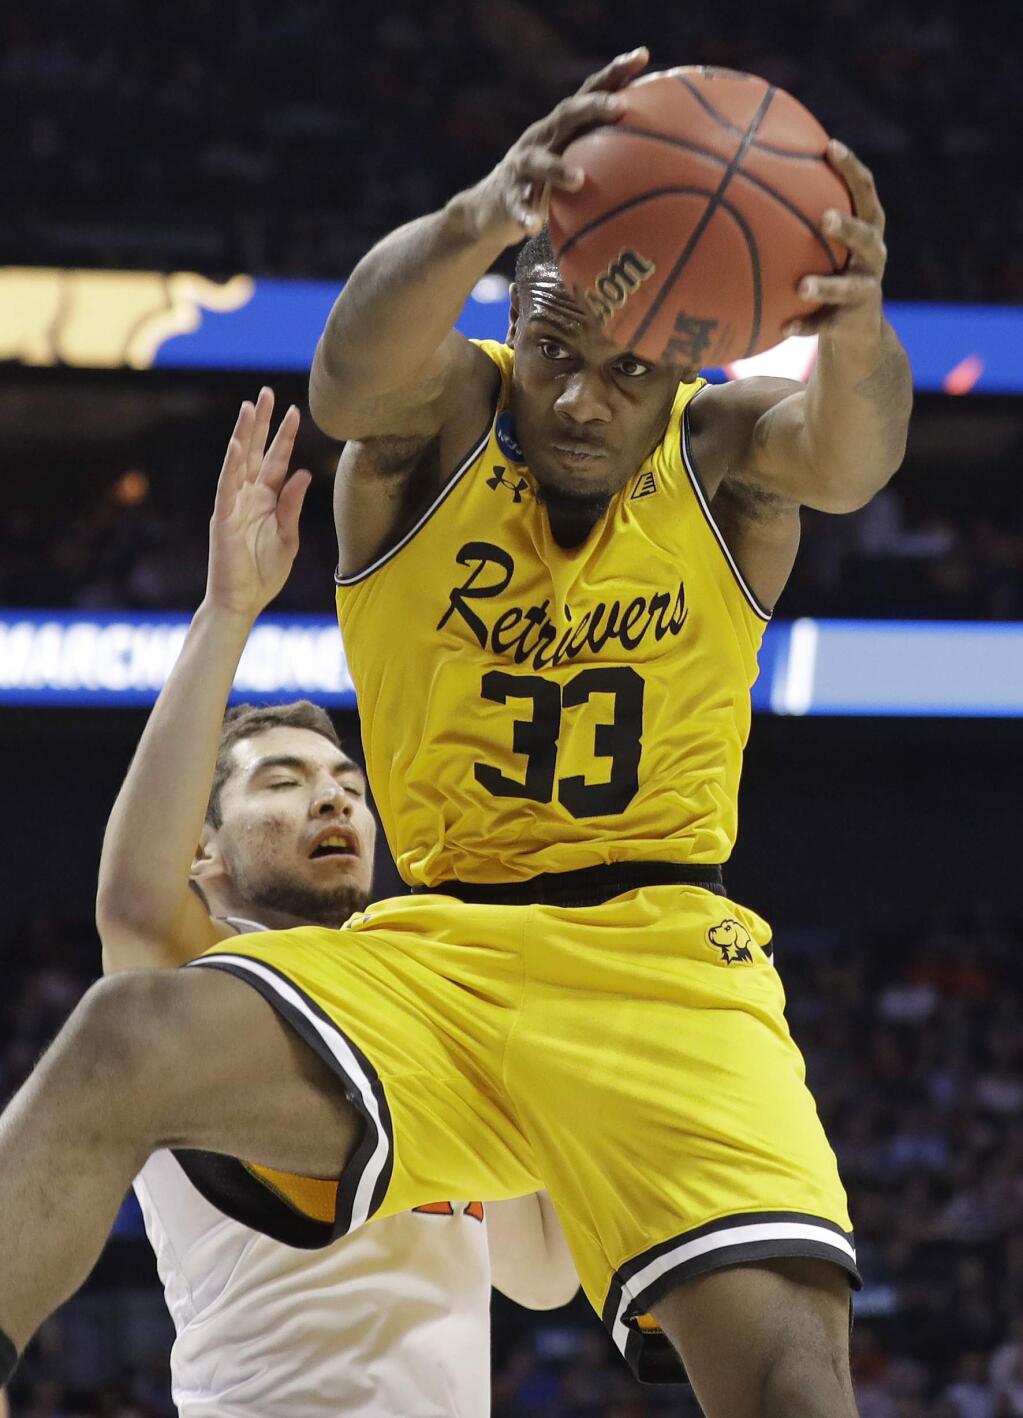 UMBC's Arkel Lamar (33) grabs a rebound in front of Virginia's Ty Jerome during the first half of a first-round game in the NCAA men's college basketball tournament in Charlotte, N.C., Friday, March 16, 2018. (AP Photo/Gerry Broome)